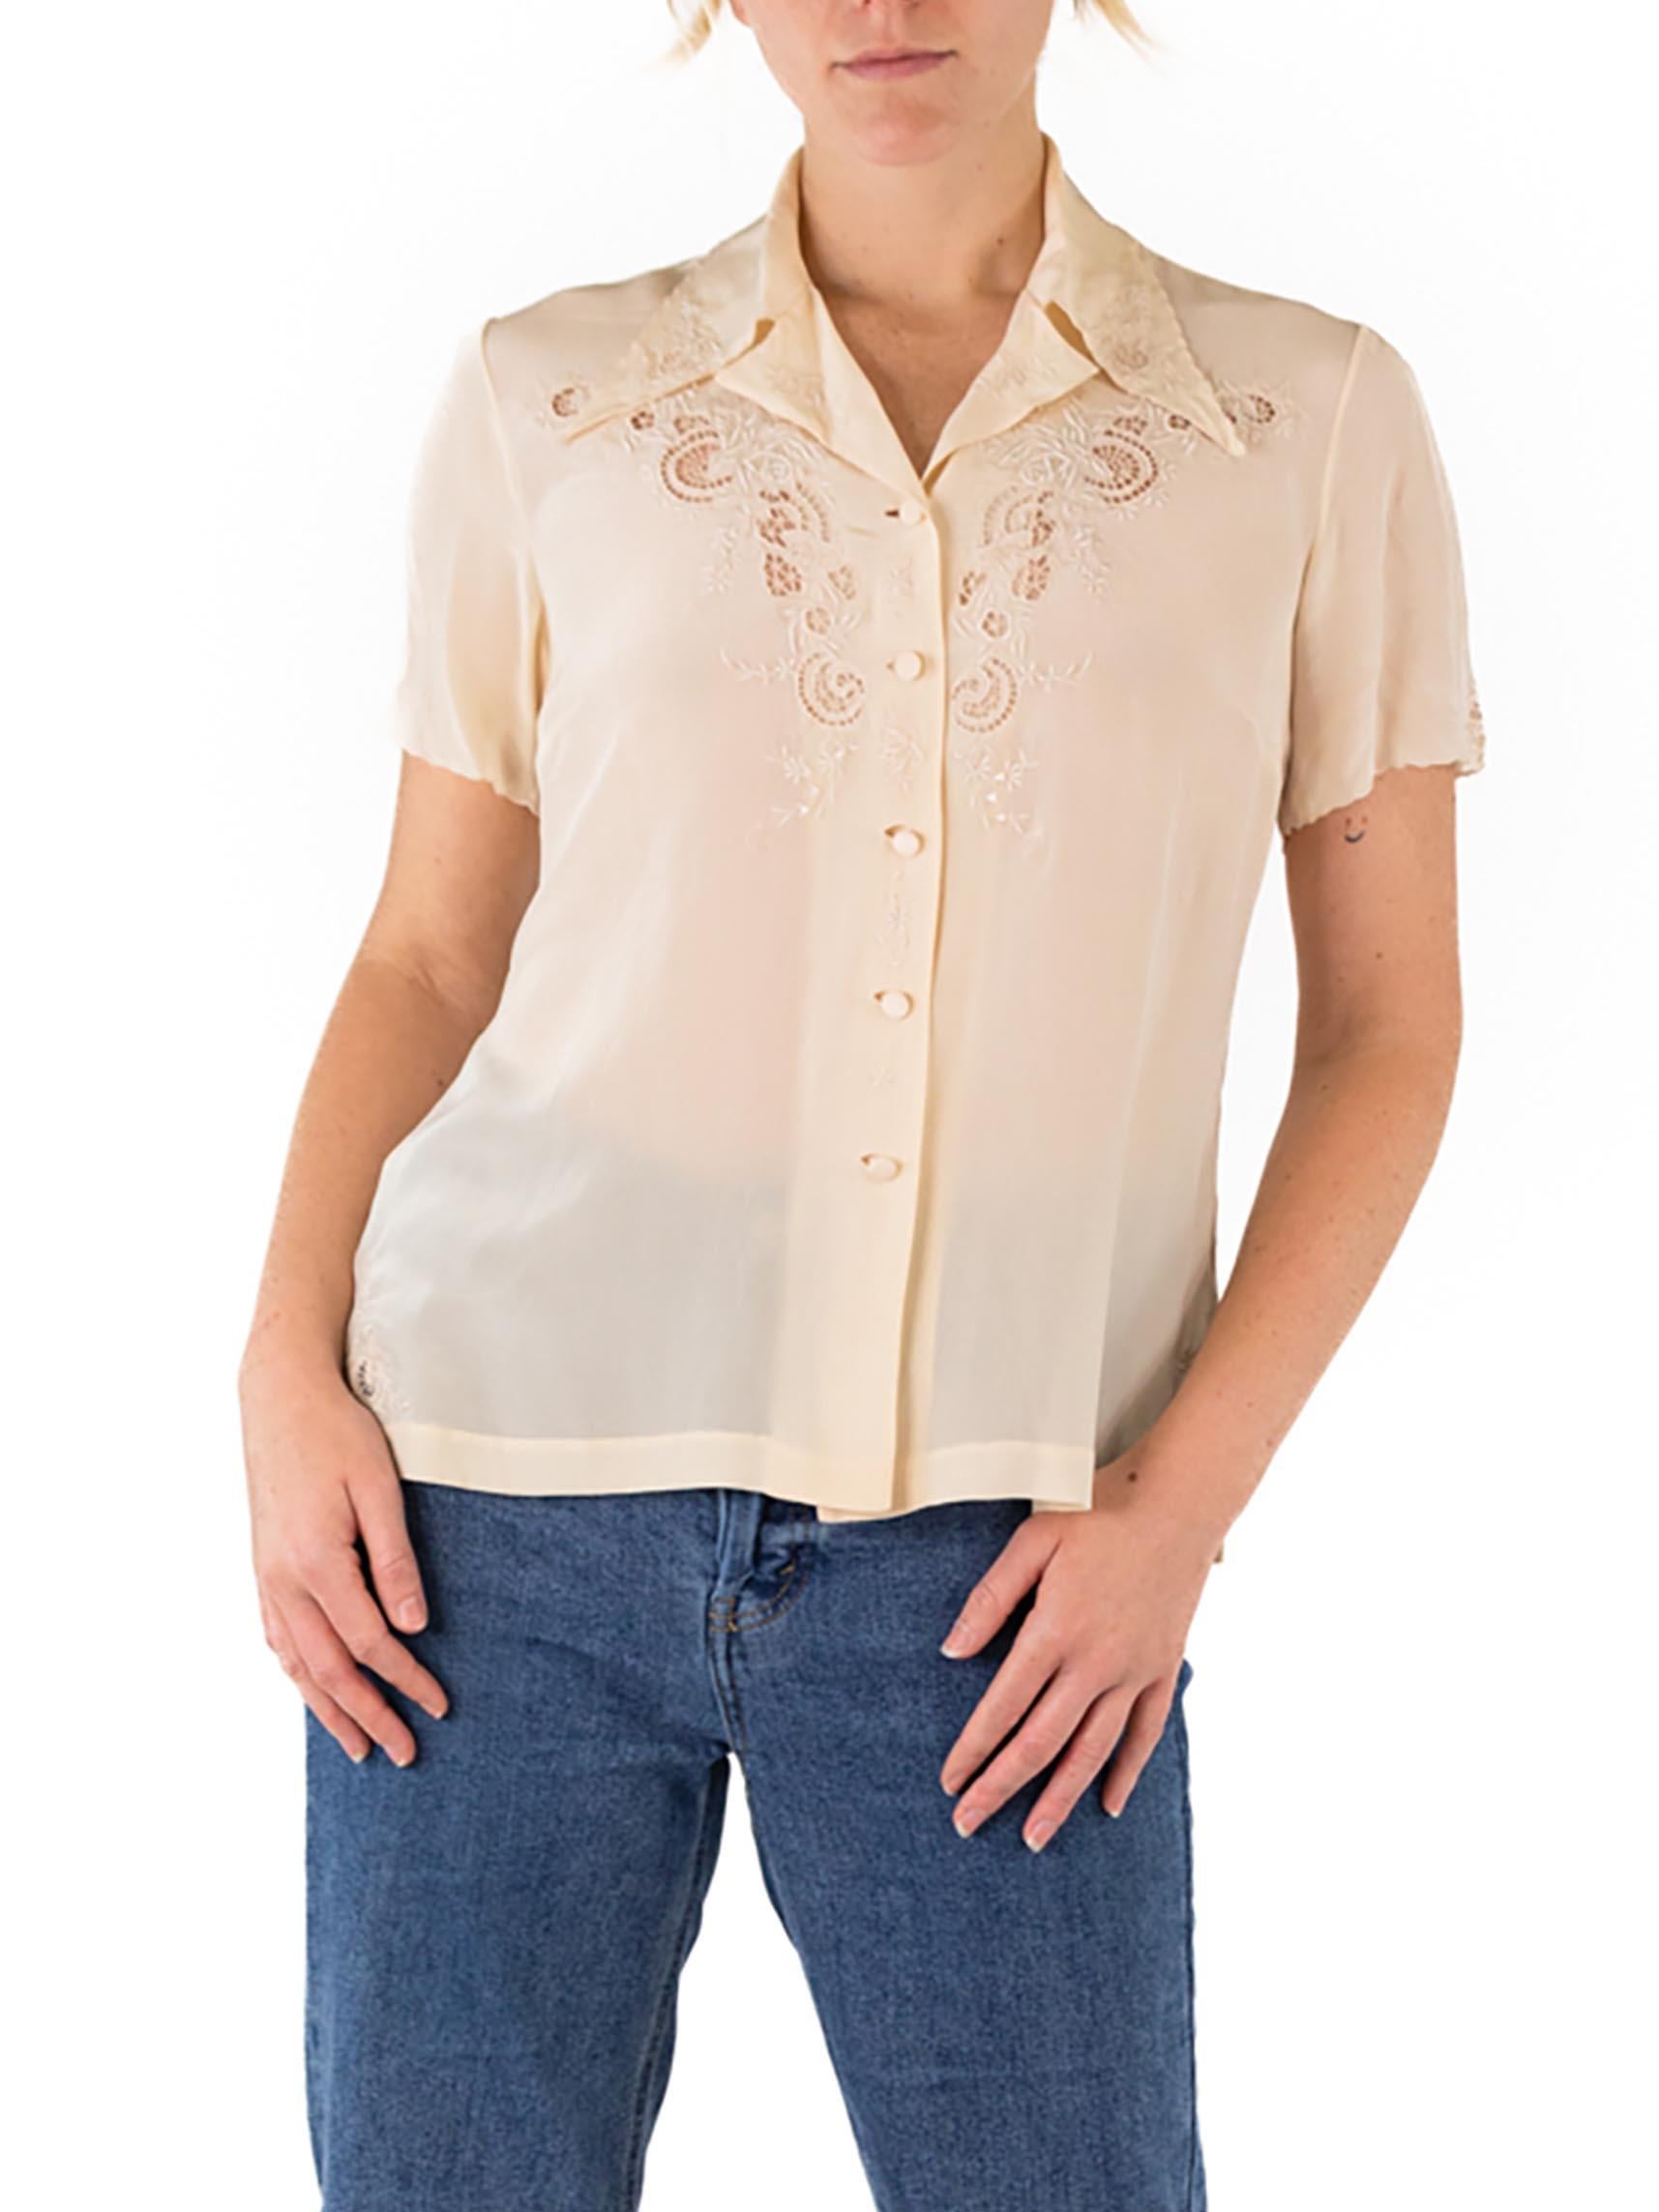 Women's 1950S Cream Silk Crepe De Chine Hand-Embroidered Shirt For Sale